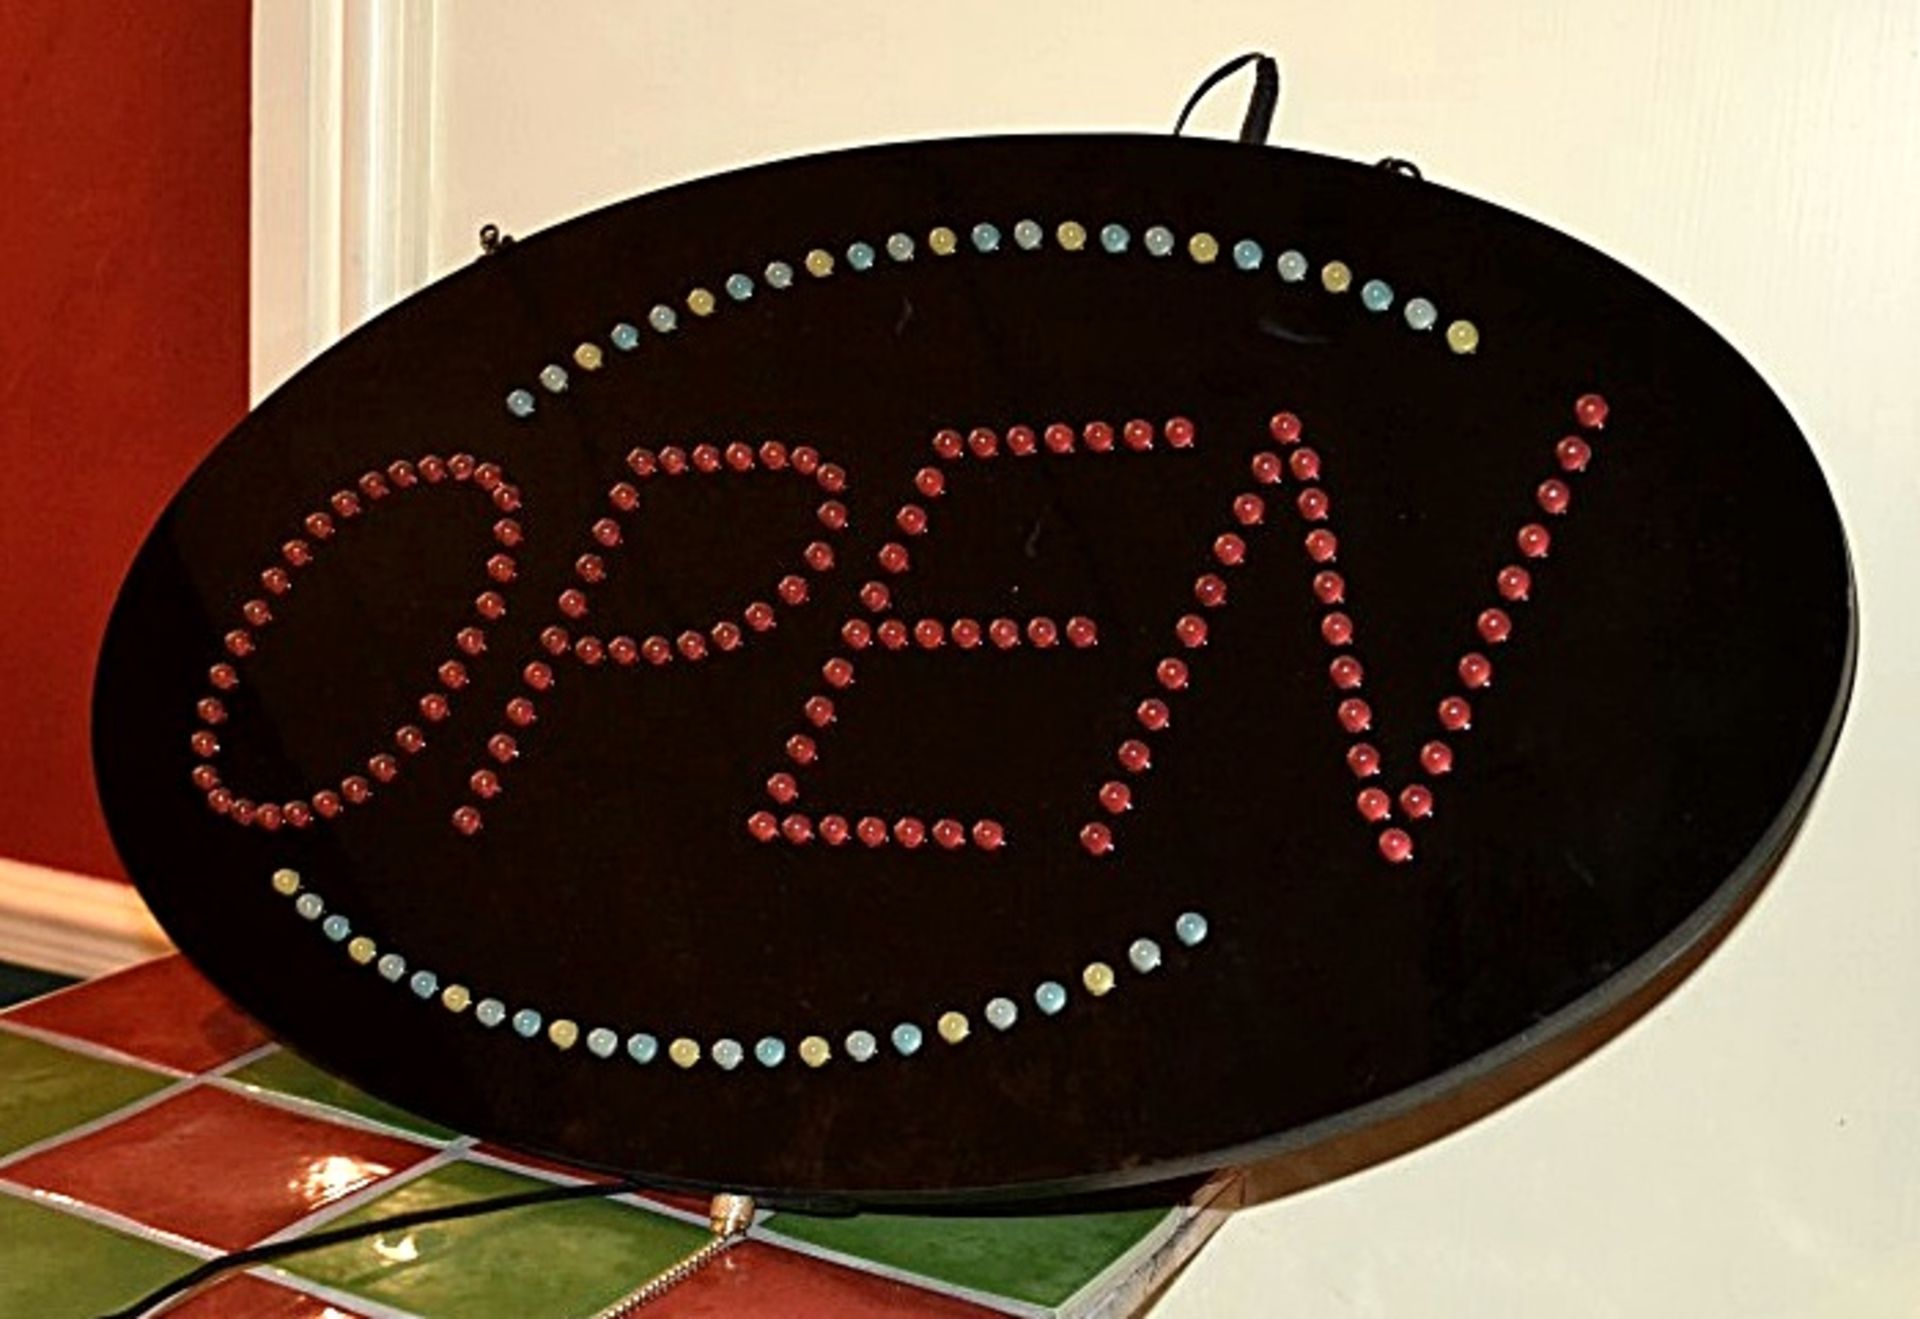 1 x LED "OPEN" Illuminated Bar Sign With UK Power Supply - From A Clean Manor House Environment In